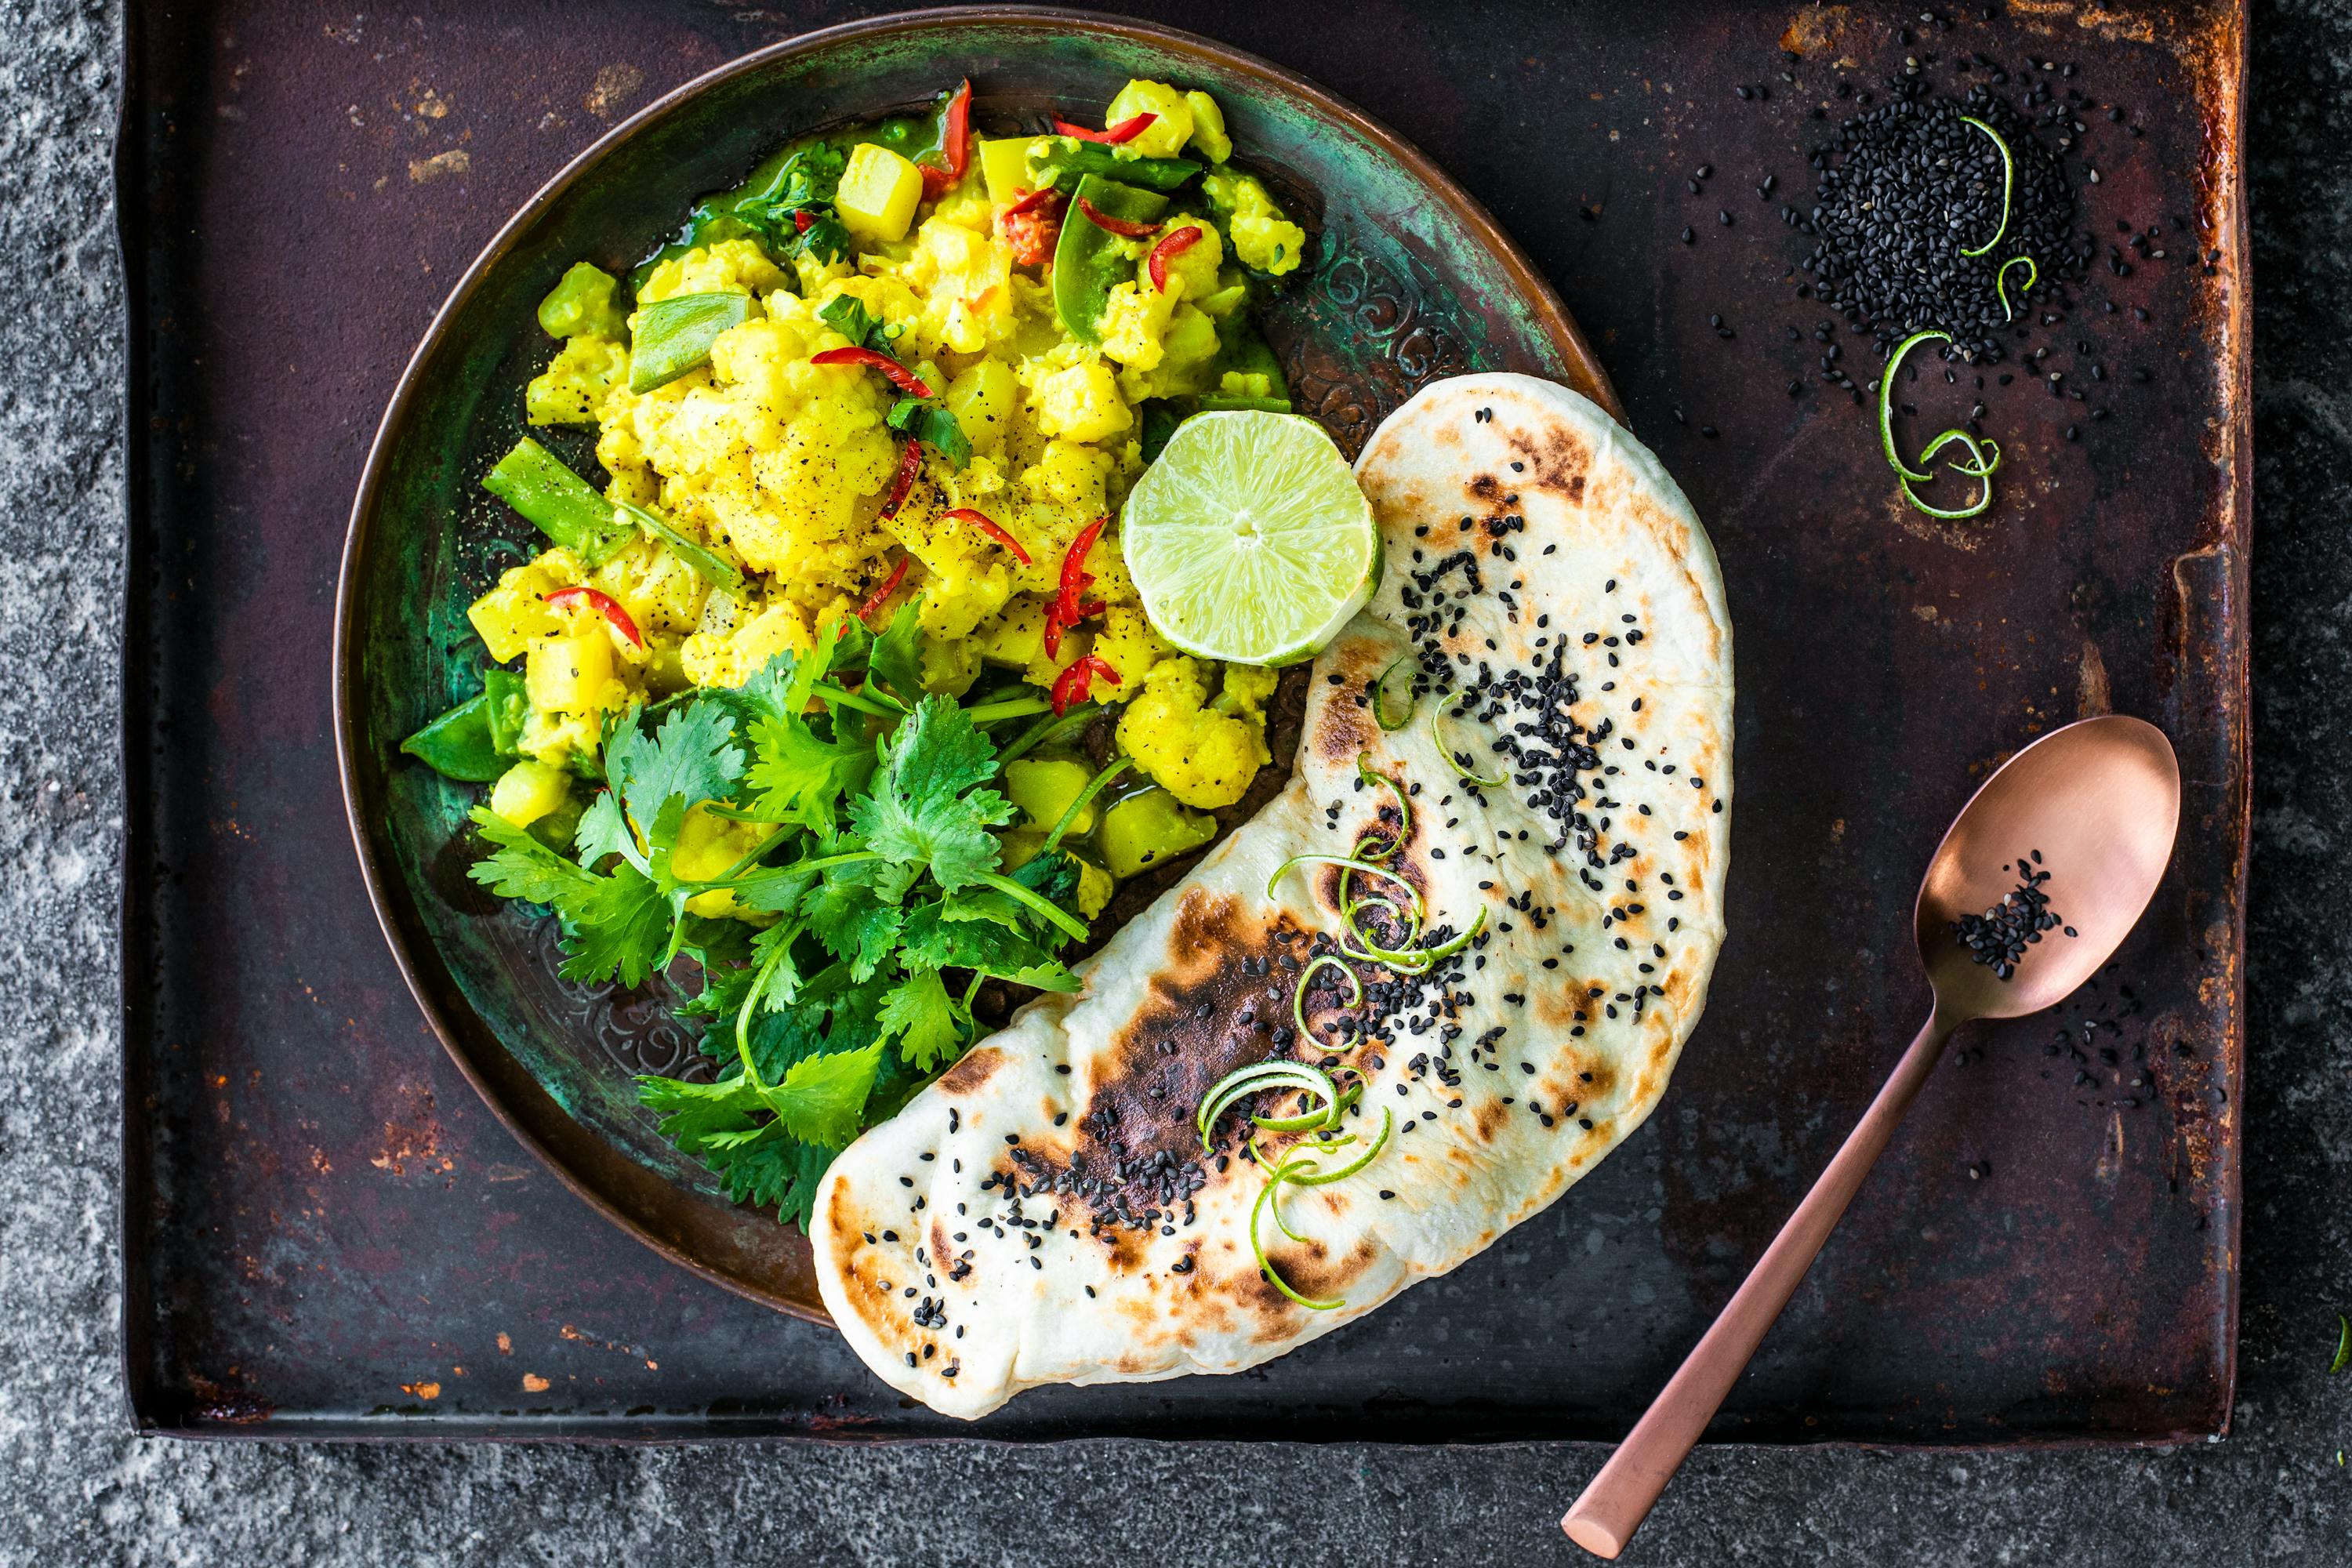 Cauliflower curry with naan